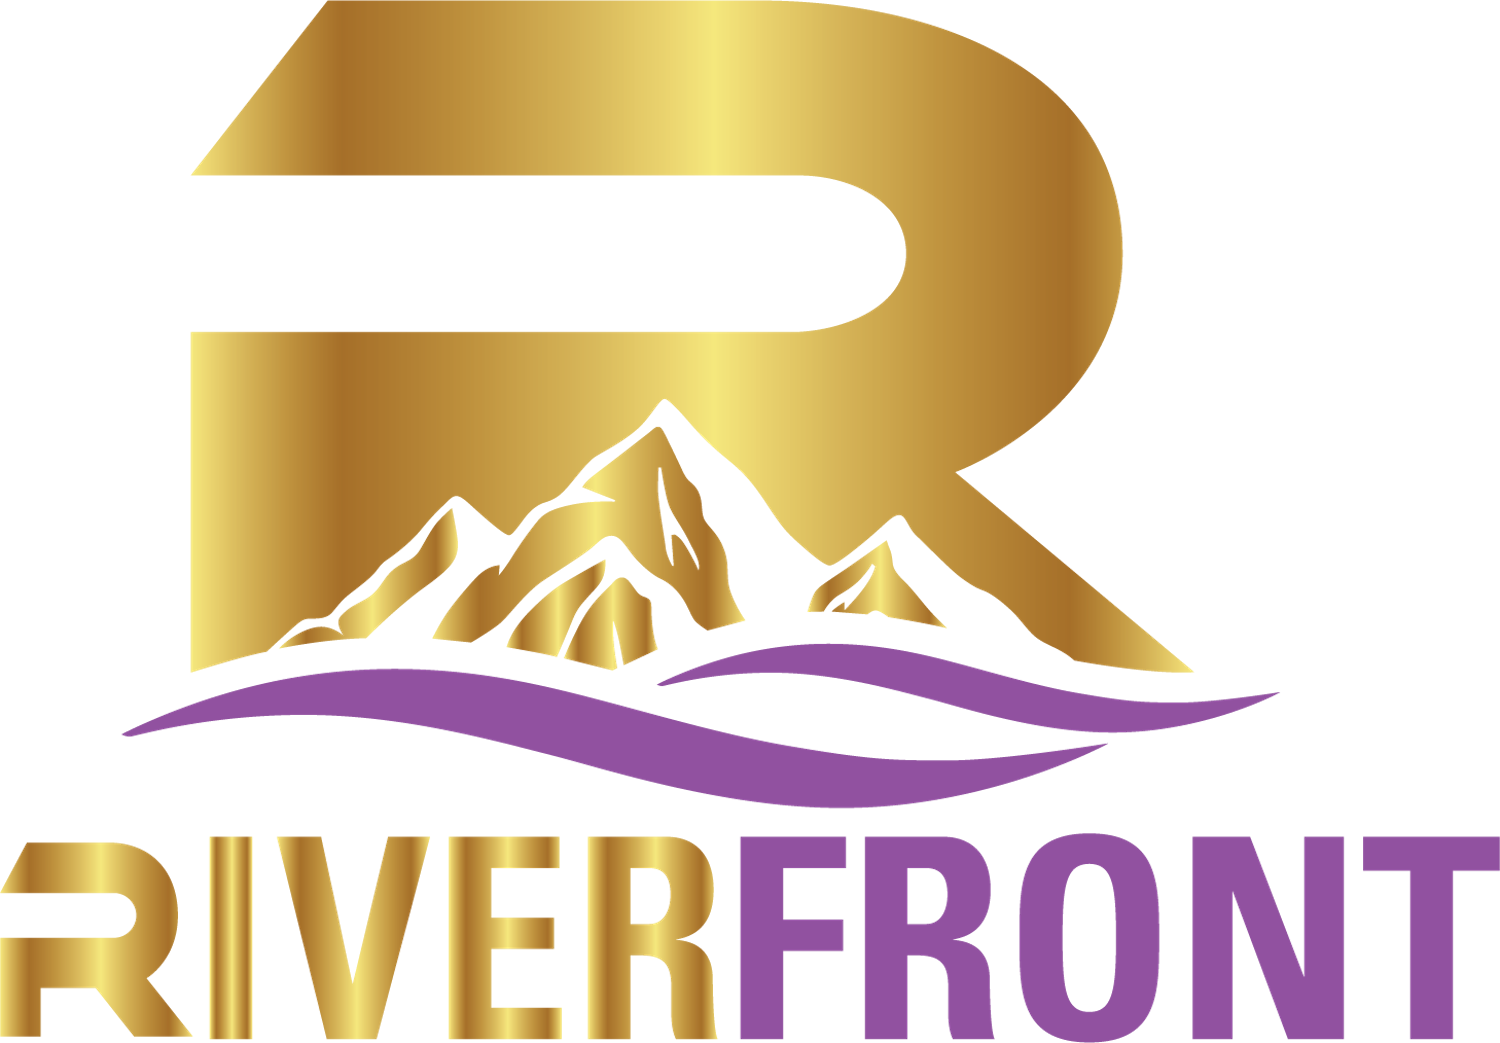 Everything Riverfront -